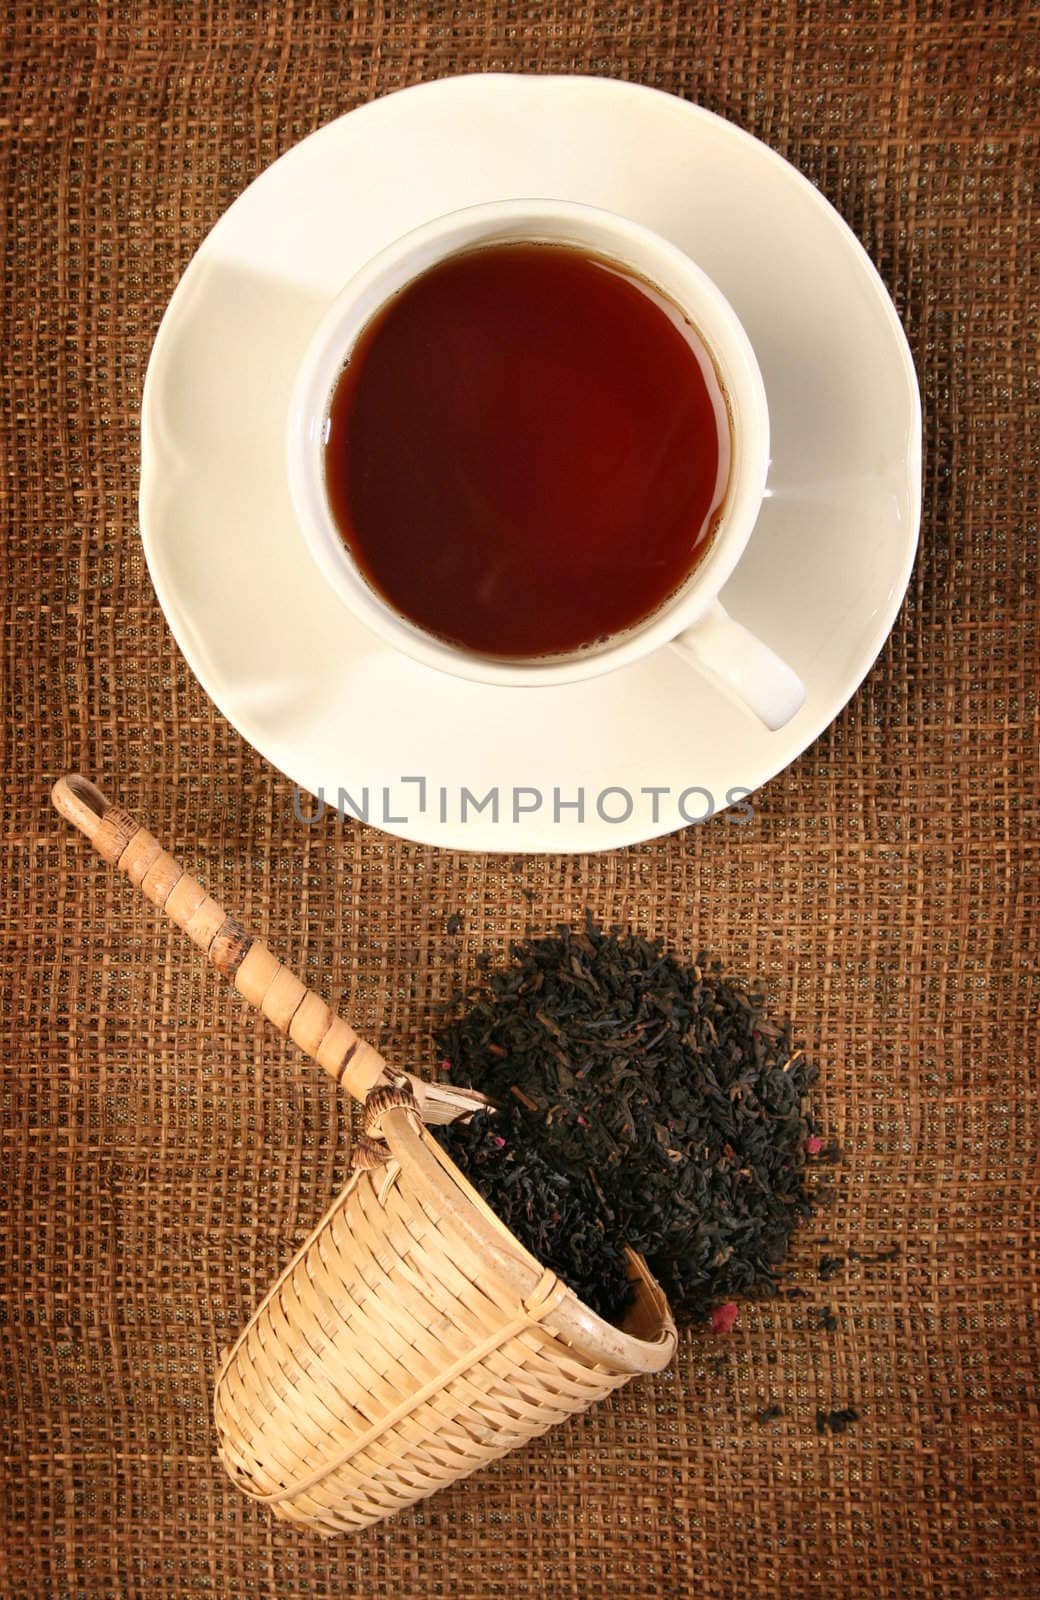 A wicker scoop with herb tea leaves and a cup of tea by Erdosain